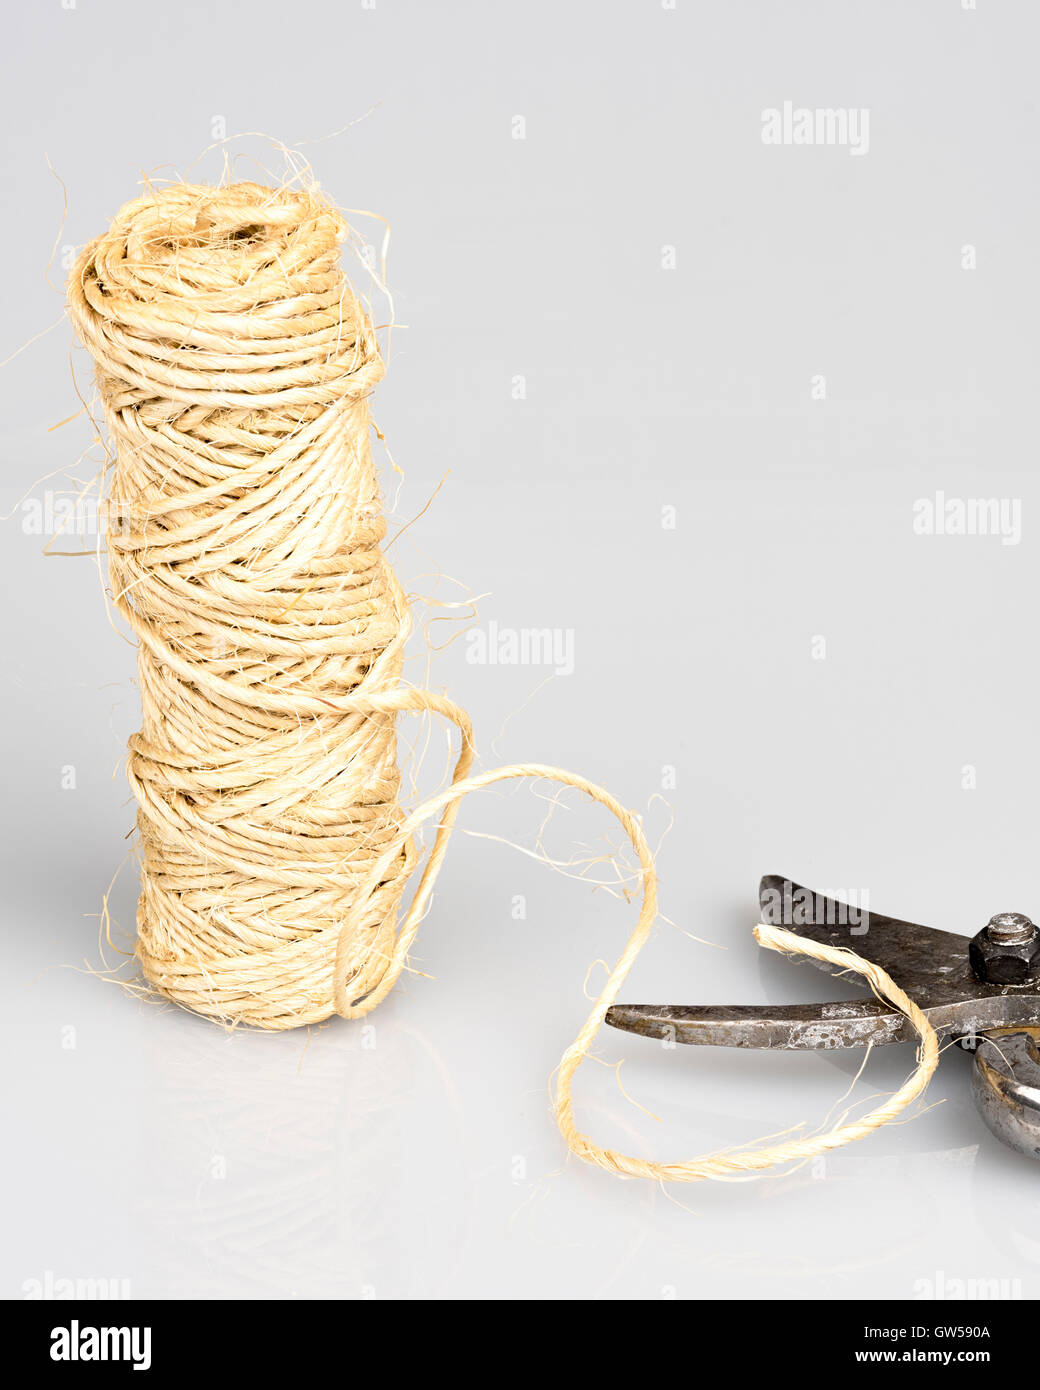 Roll of string used for yard work and cutting sheers Stock Photo